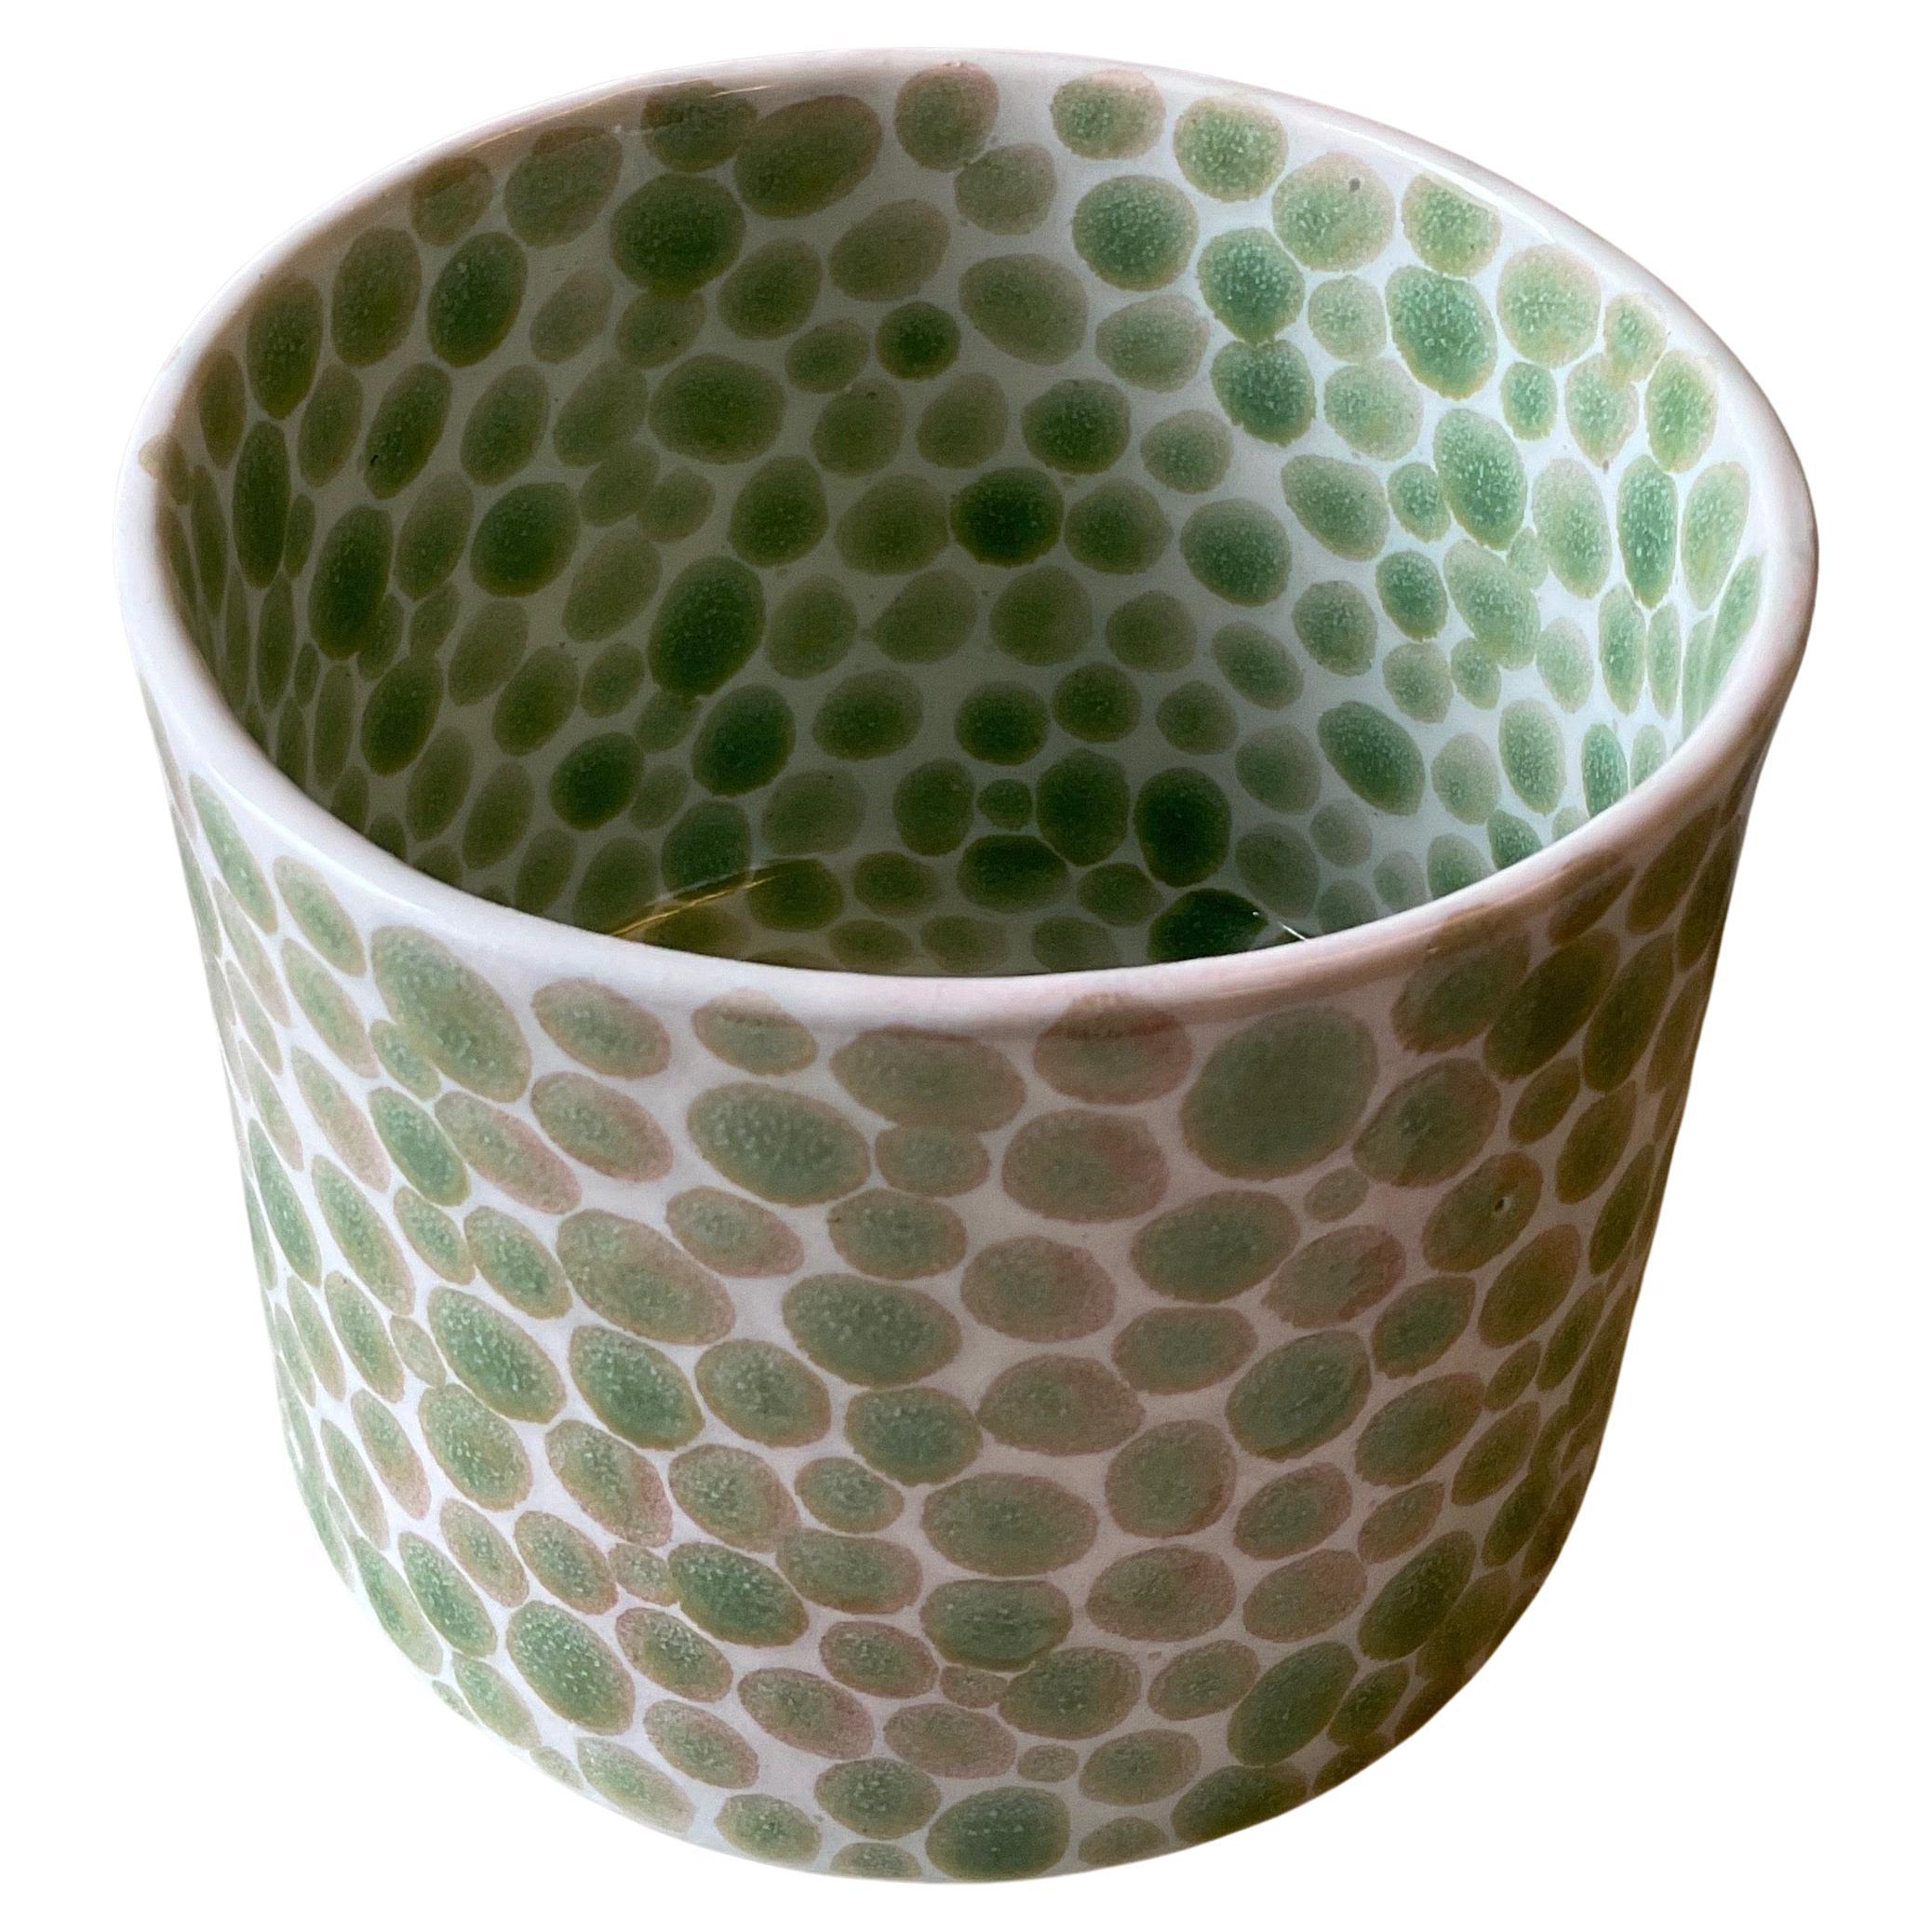 Small porcelain vase glazed with hand-painted green dots. Measures: 4.5